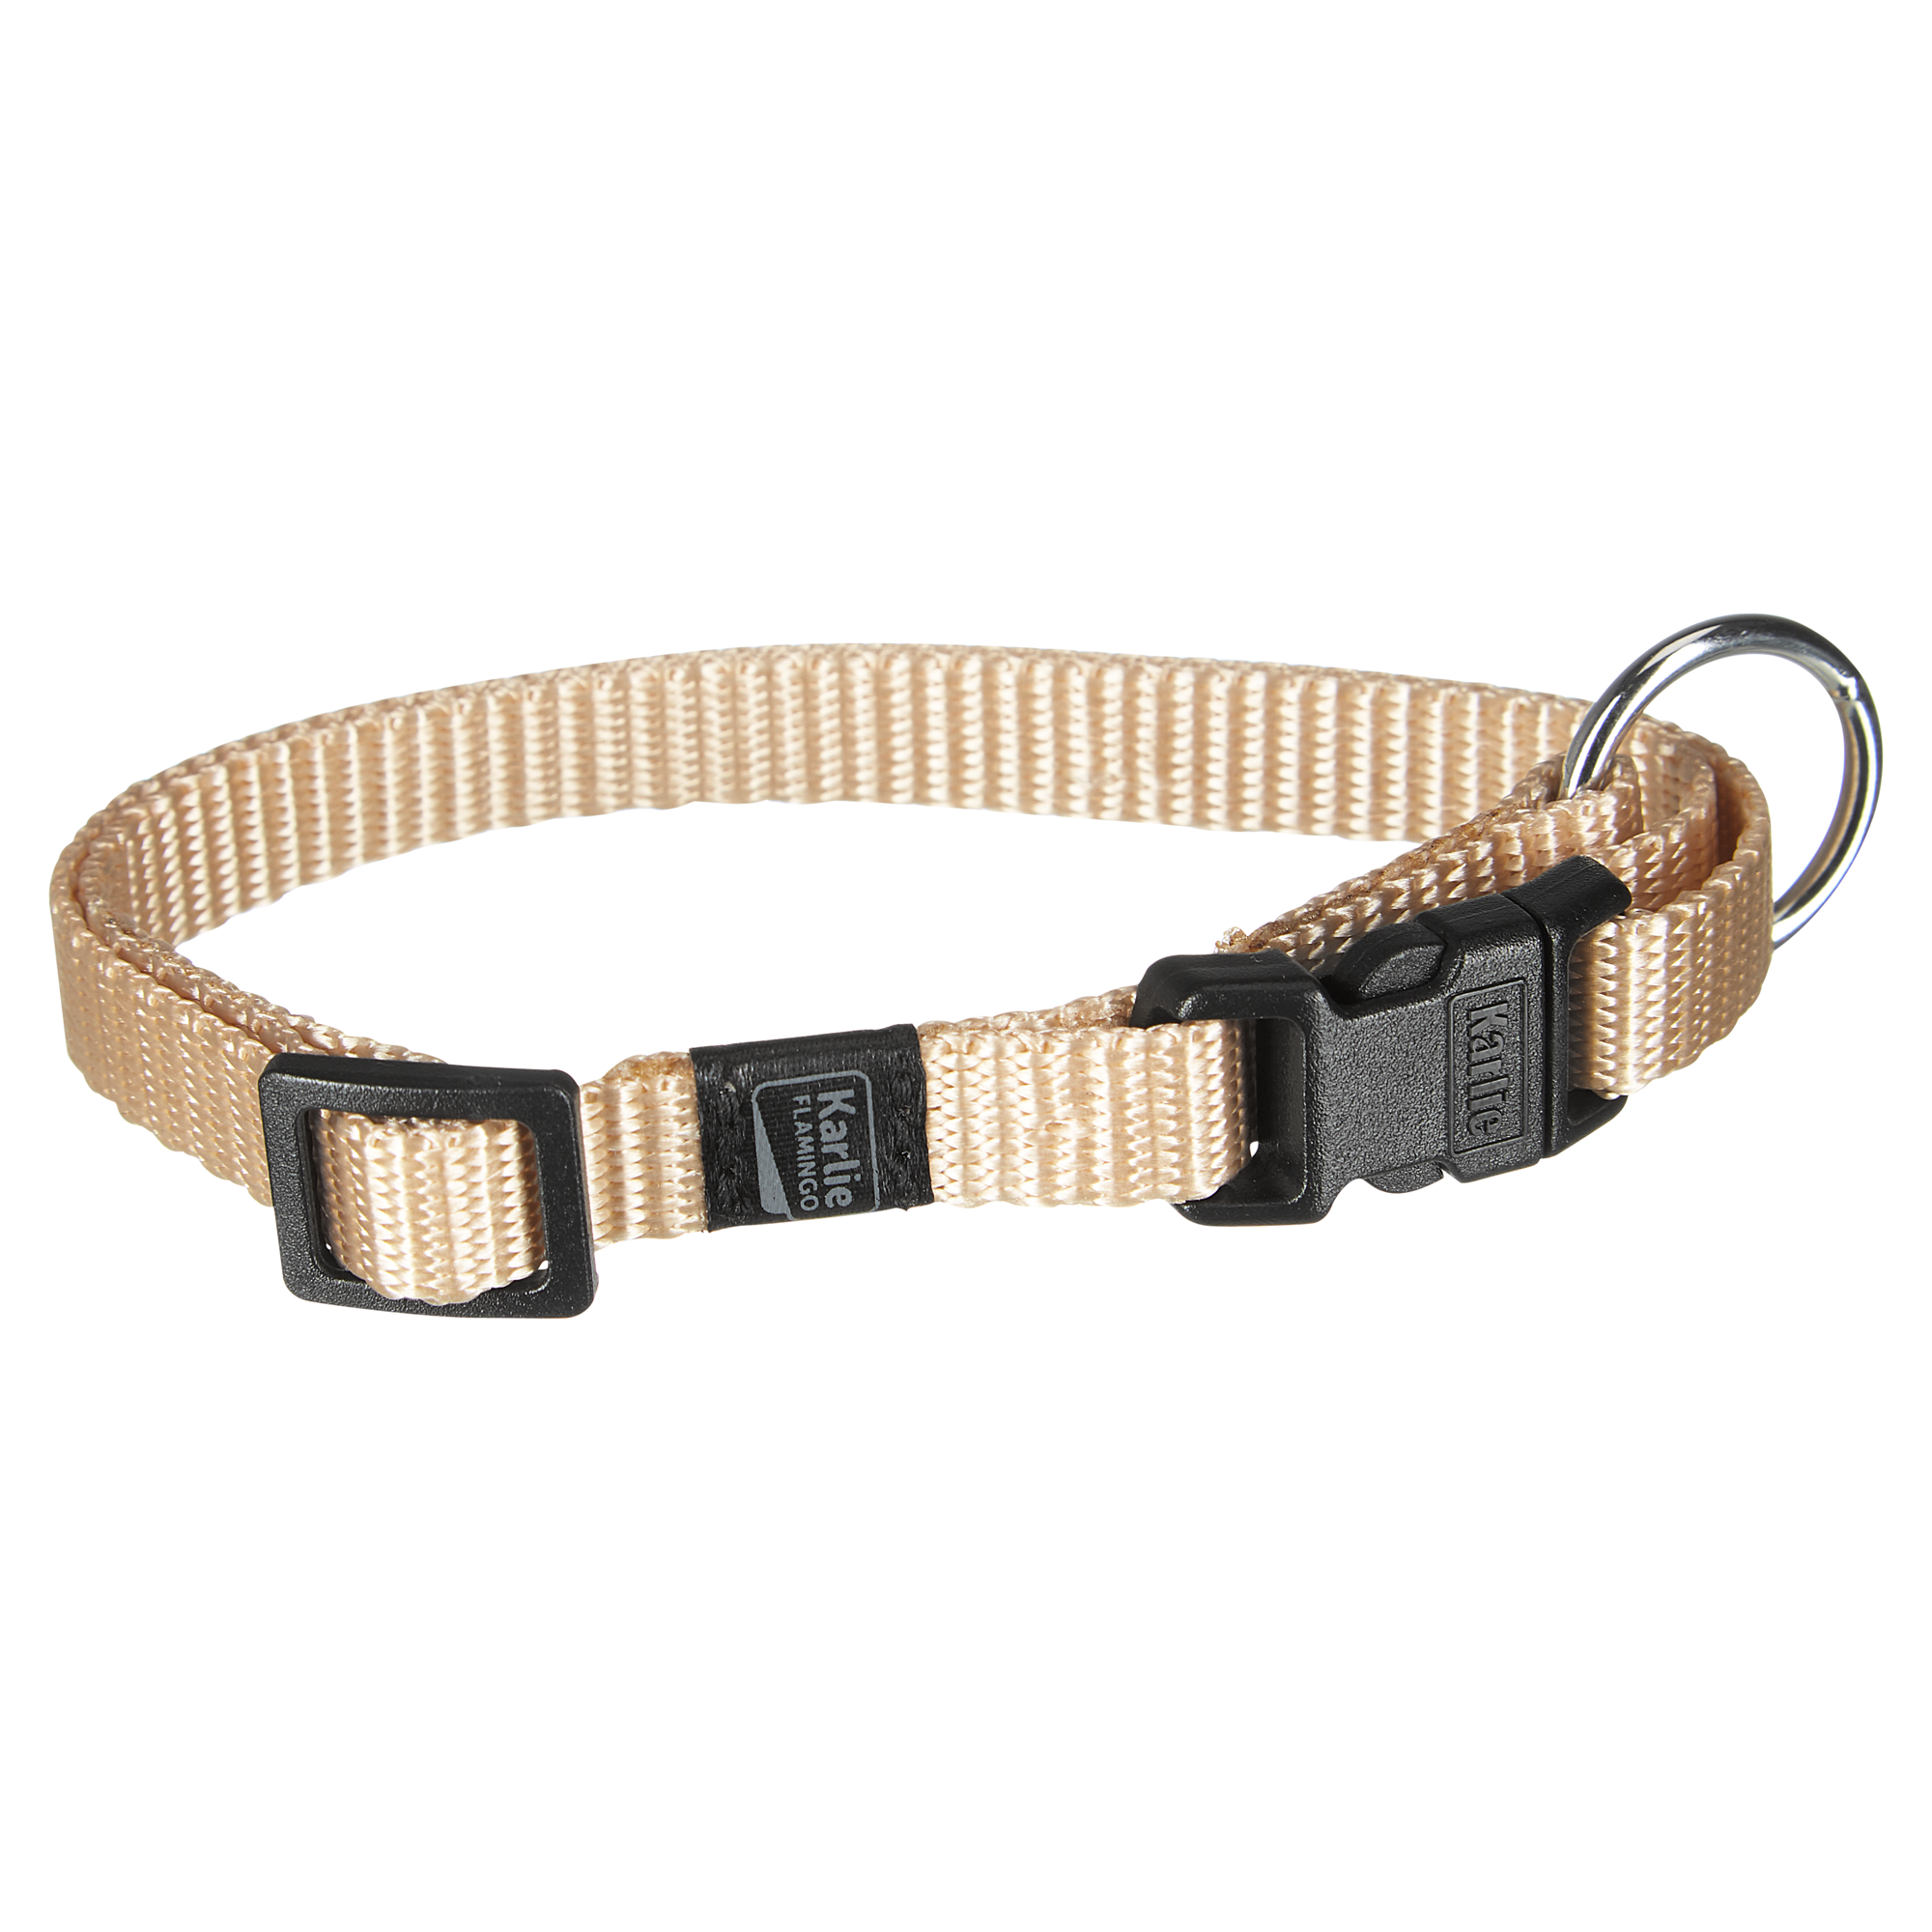 Hundehalsband "Art Sportiv Plus" beige Gr. XS 1 cm + product picture